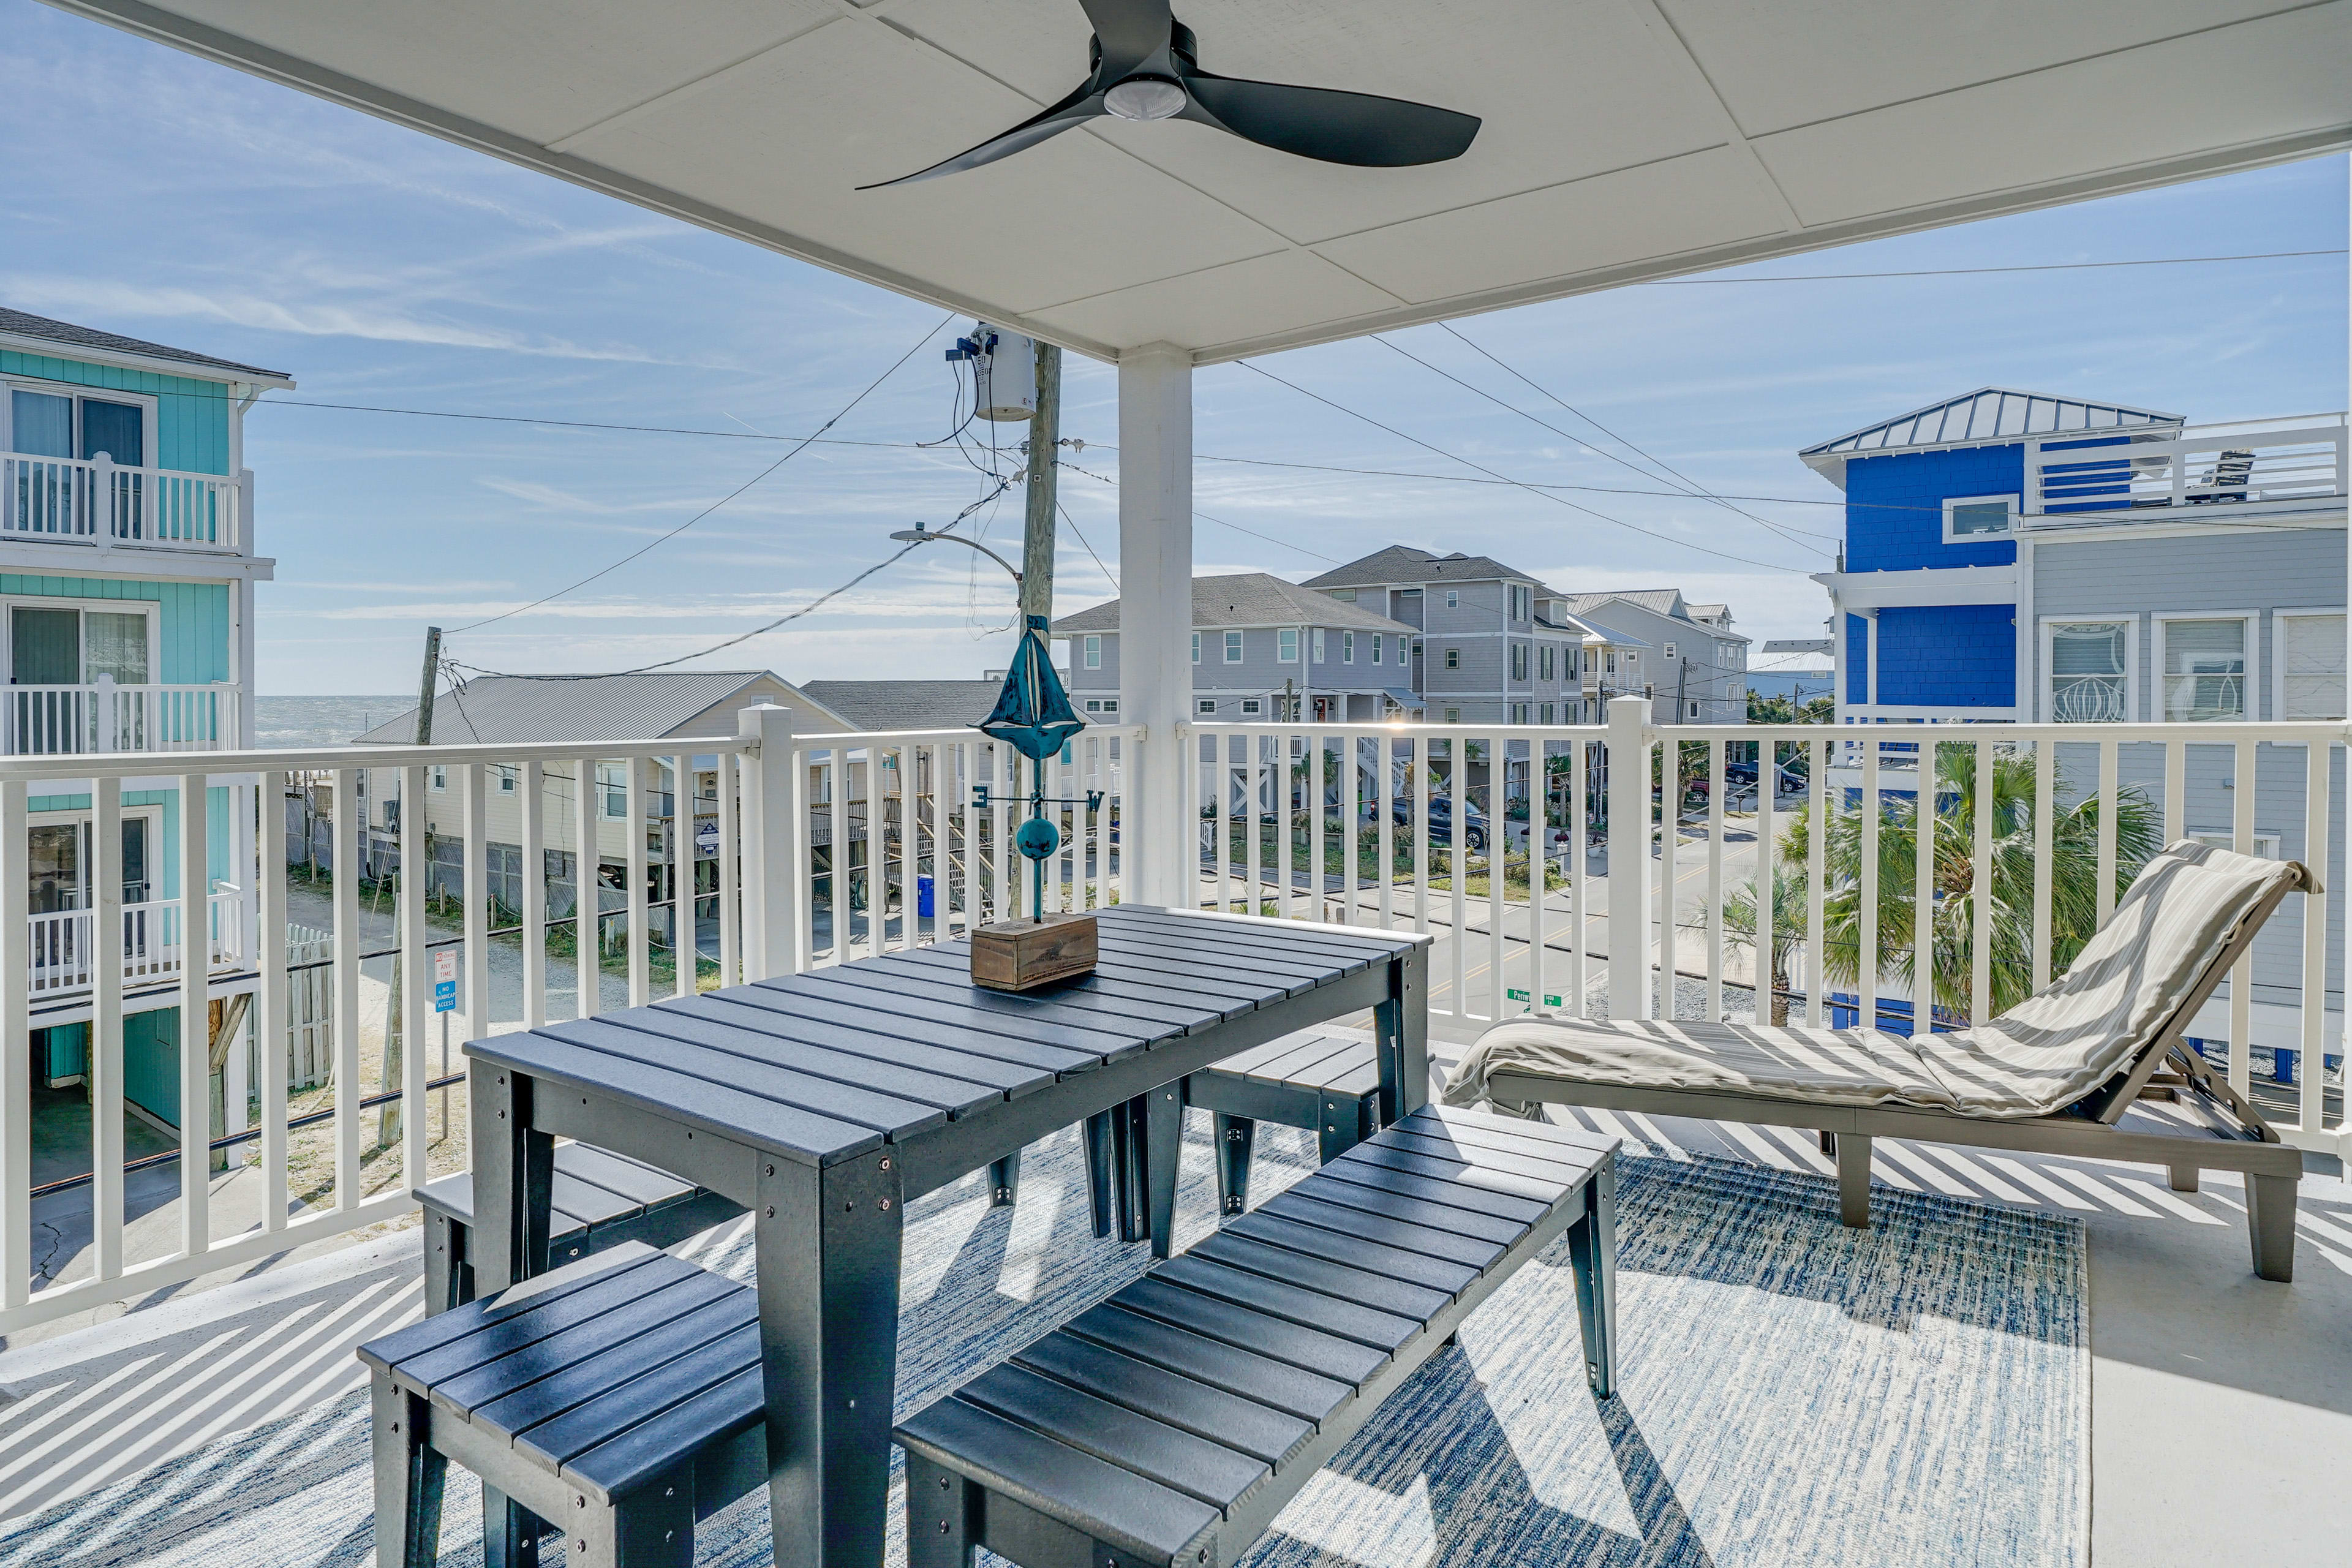 Covered Deck | Ocean Views | Outdoor Dining Area | Balcony